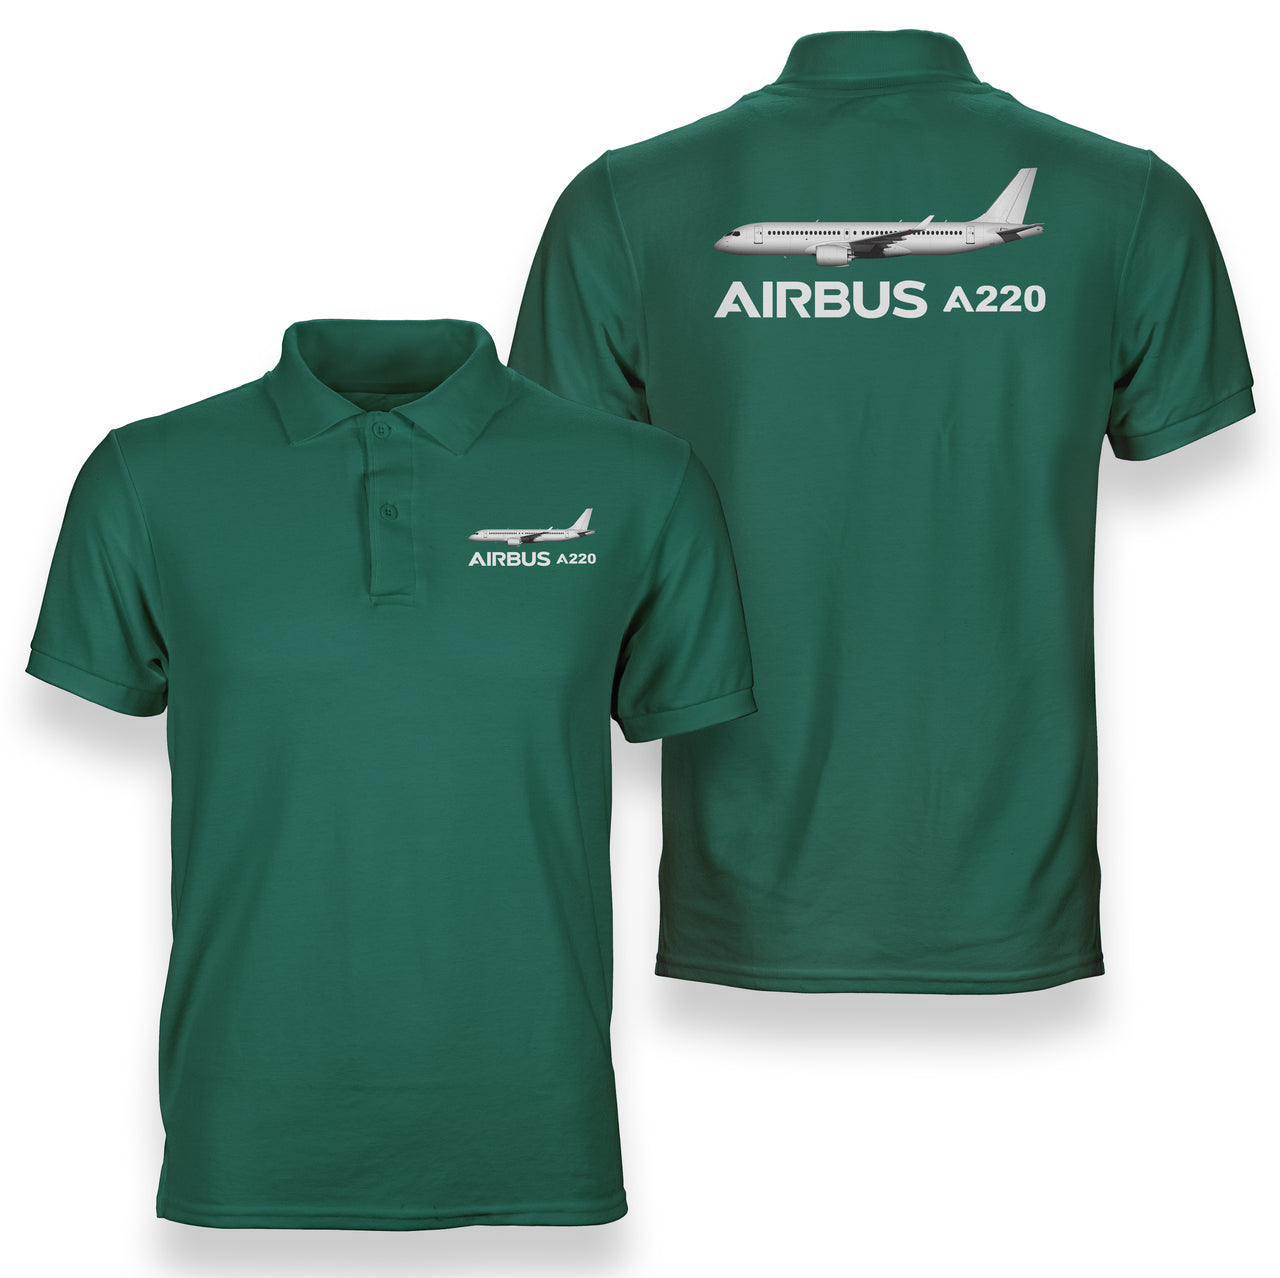 The Airbus A220 Designed Double Side Polo T-Shirts